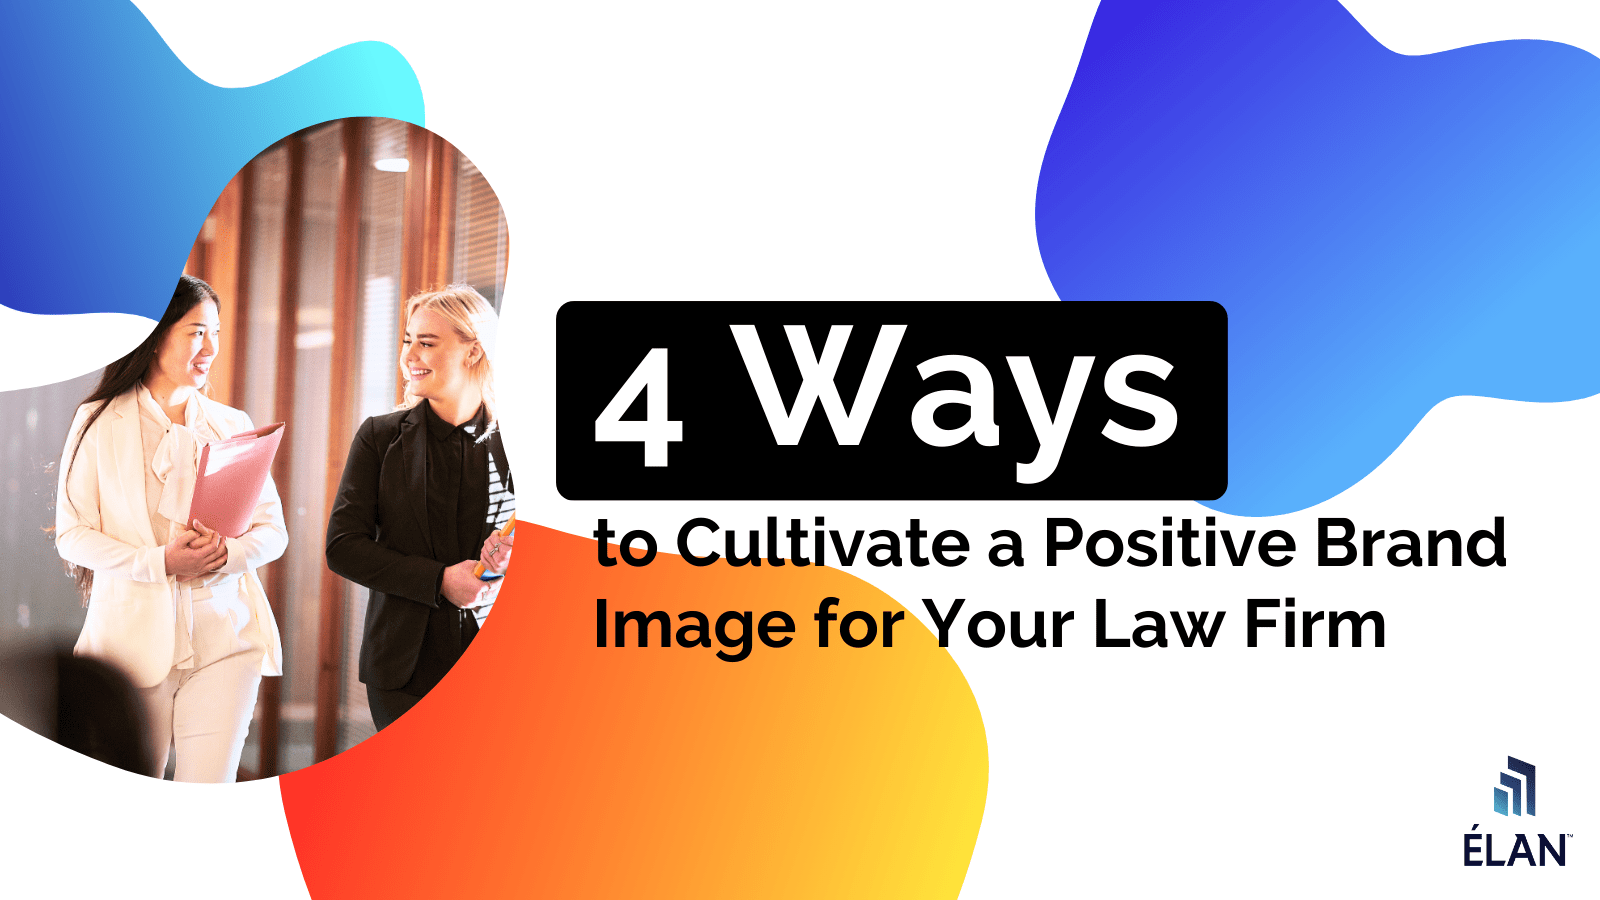 4 Ways to Cultivate a Positive Brand Image for Your Law Firm